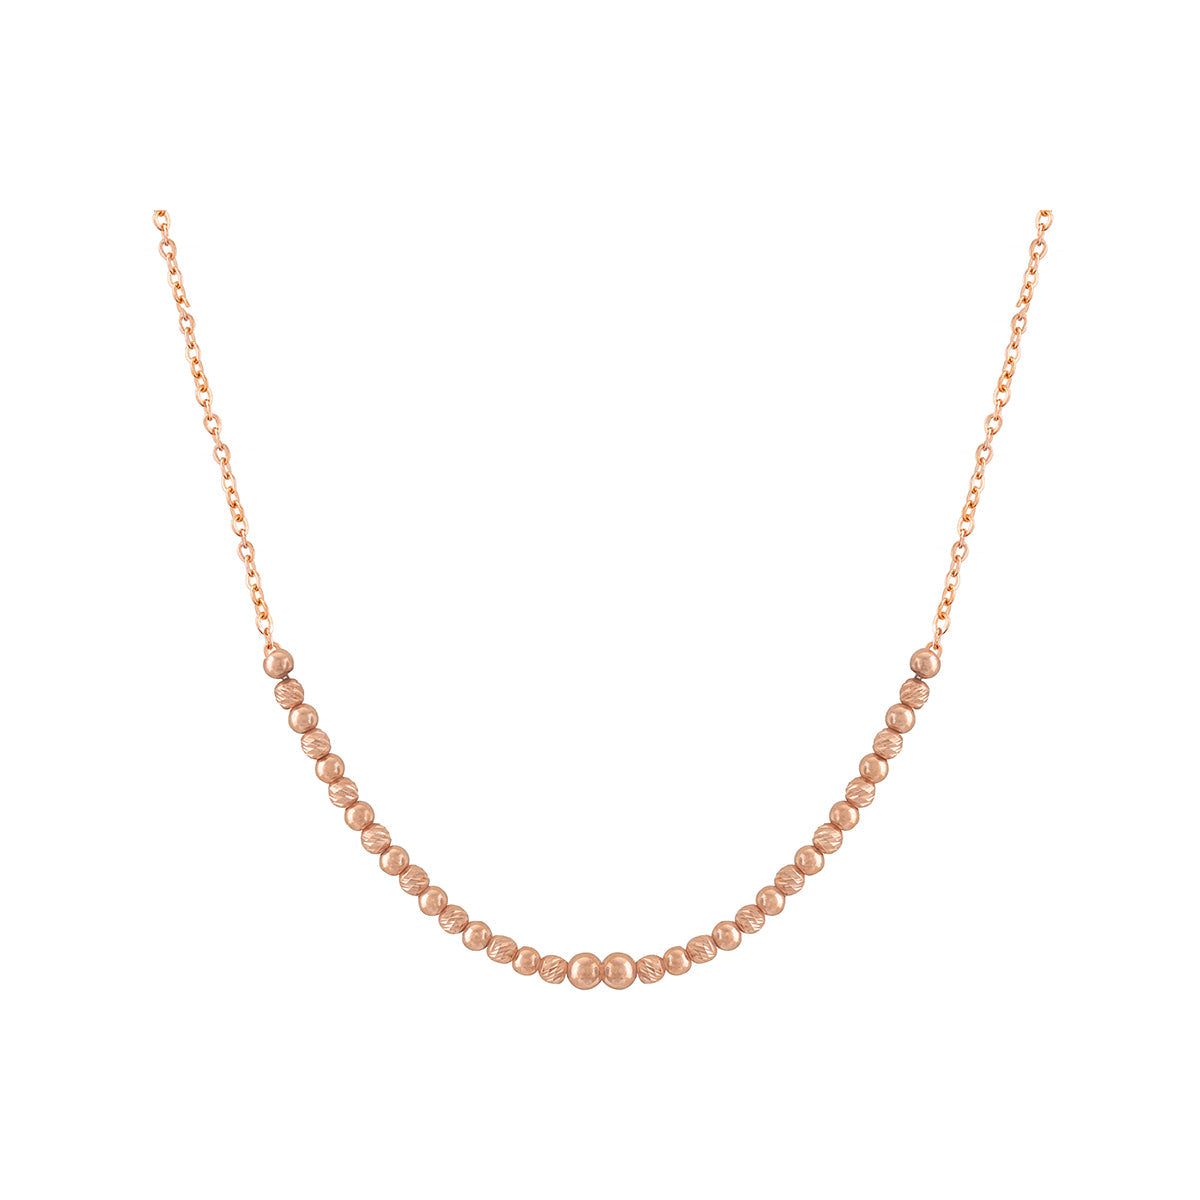 Moon Beads Chain Necklace in 18K Rose Gold